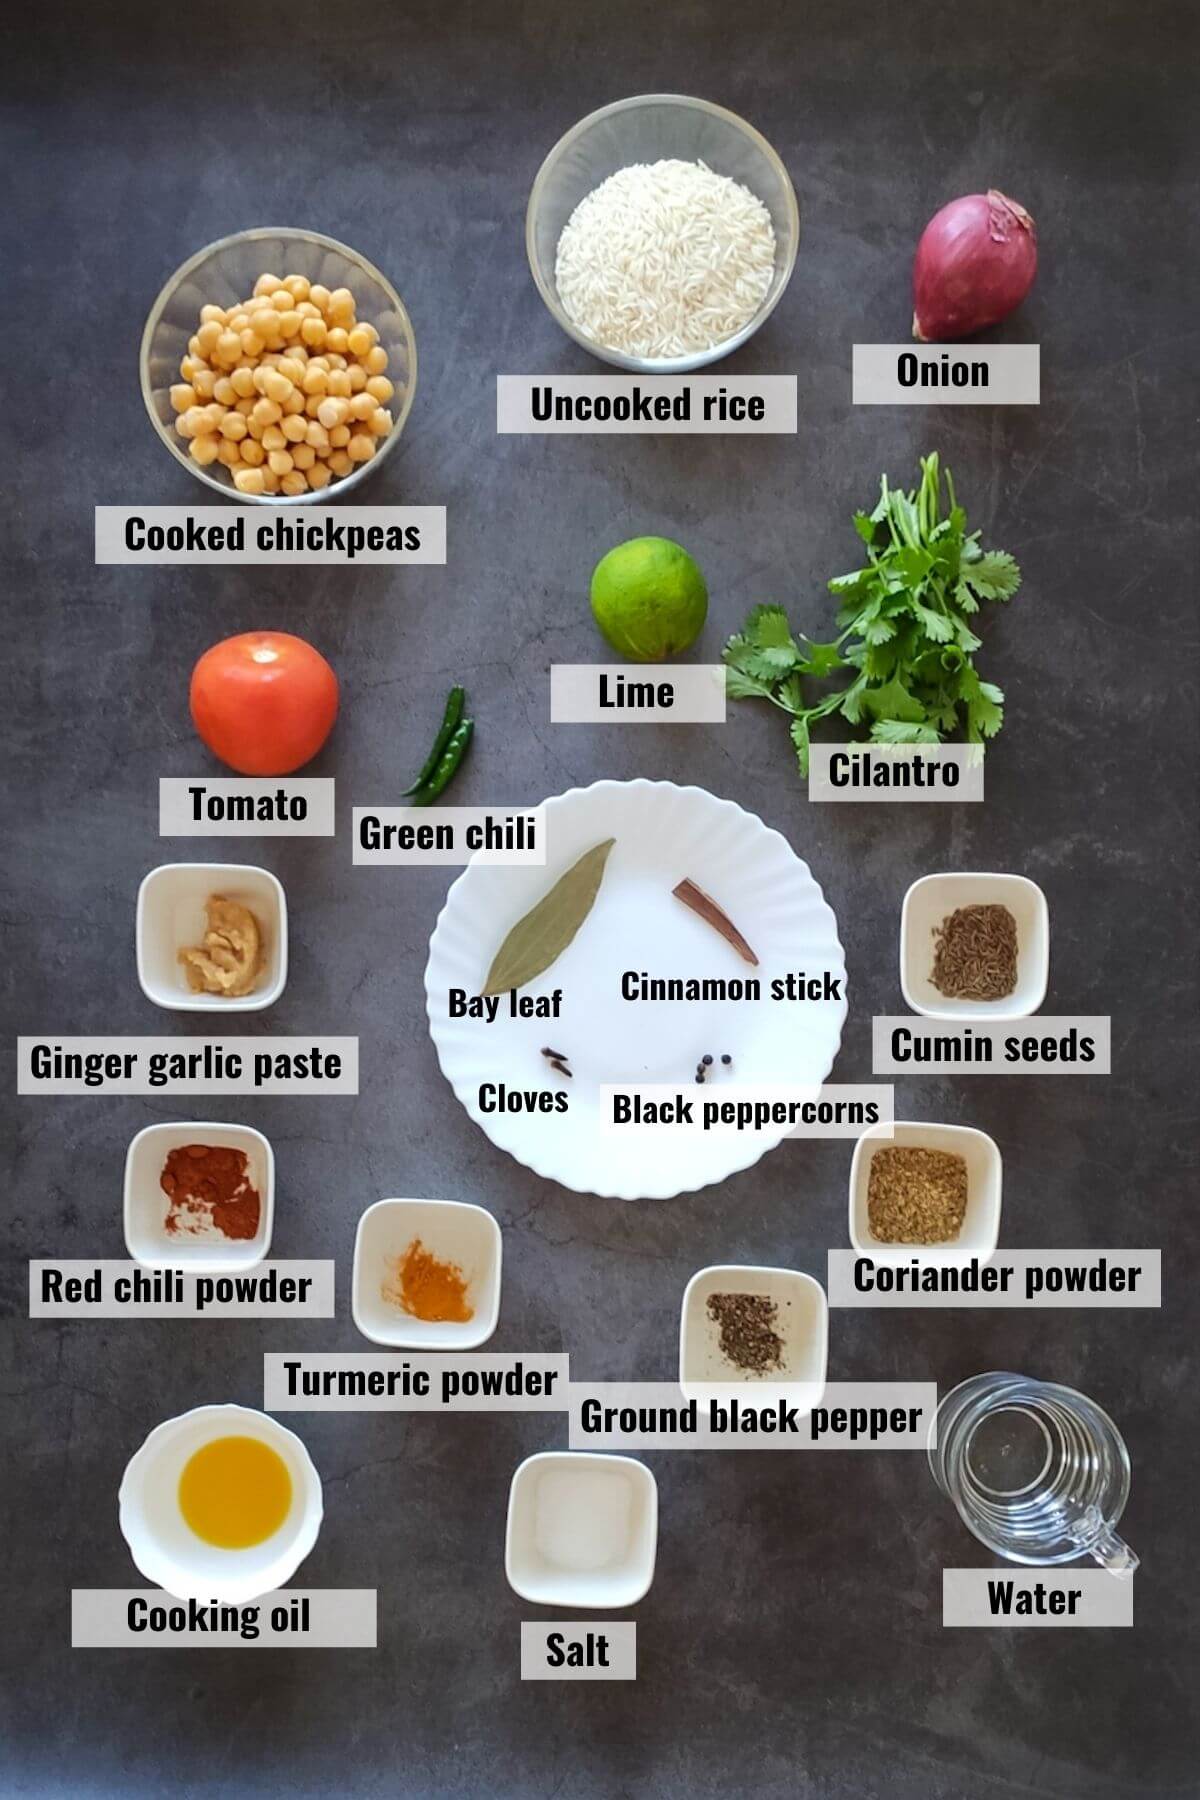 Ingredients for chickpea rice labeled.